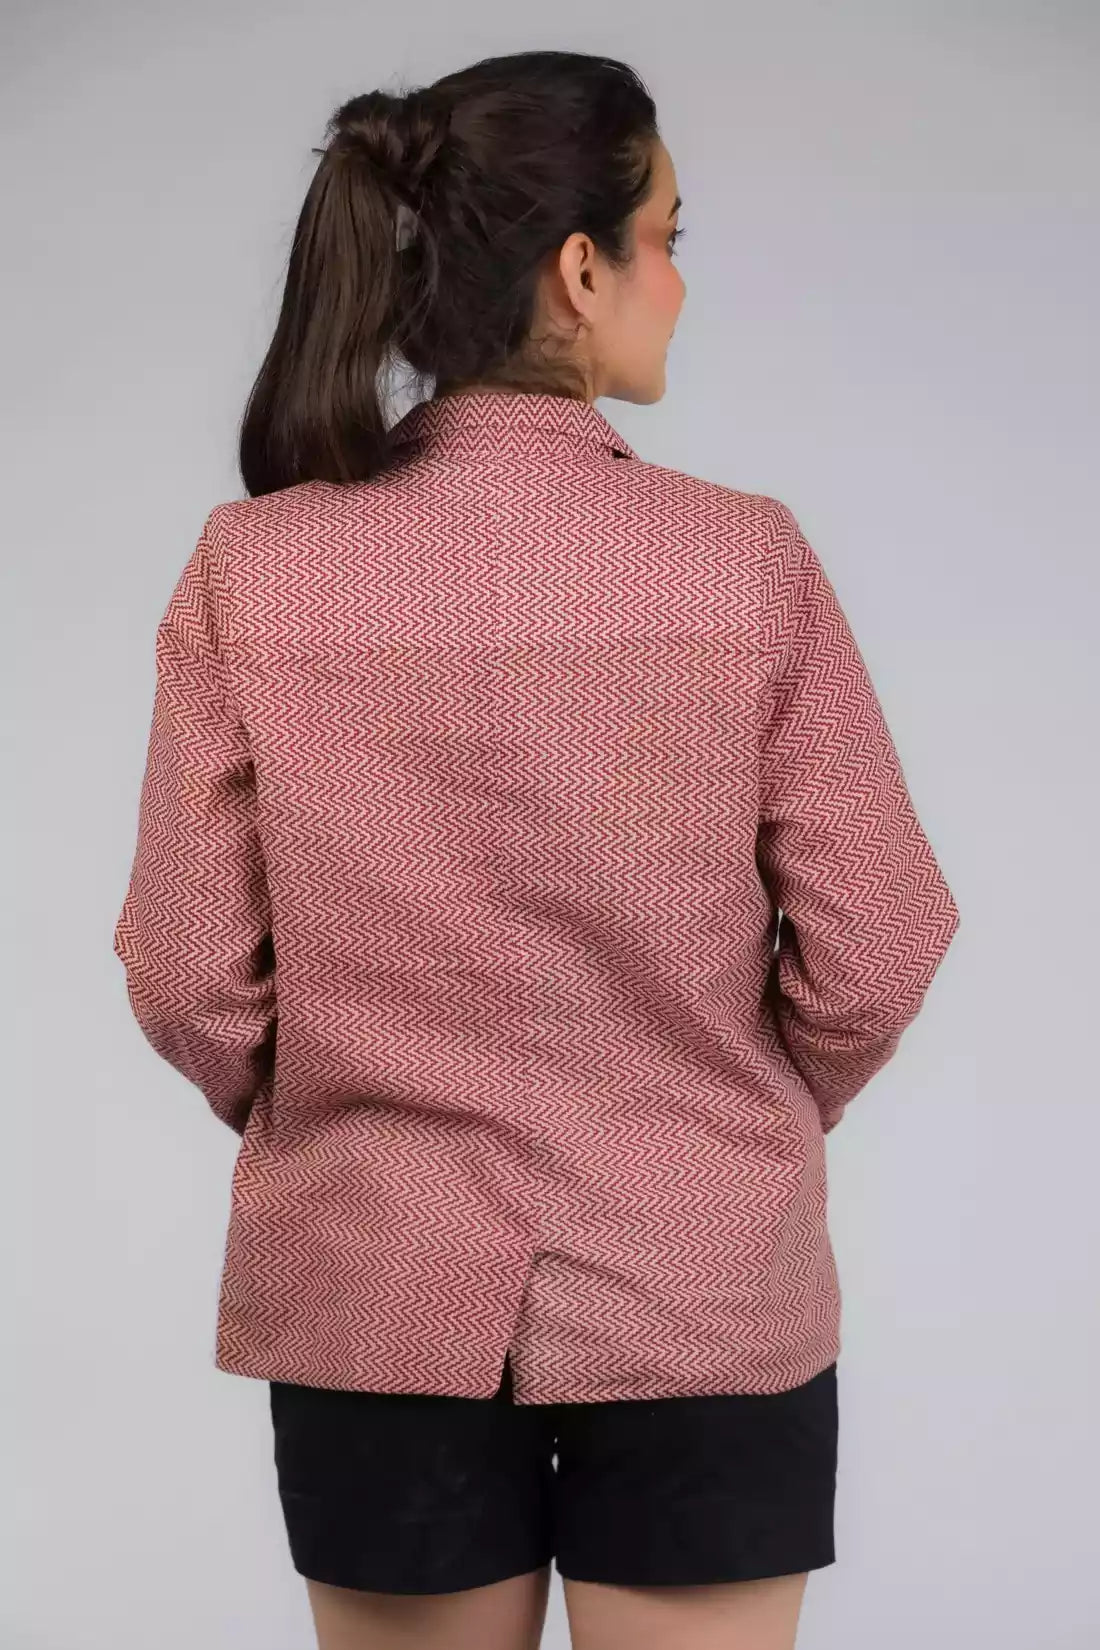 A beautiful back view of picture of Chevron Red Blazer In Pure Cotton, womens workwear standing against a grey background looking sideways